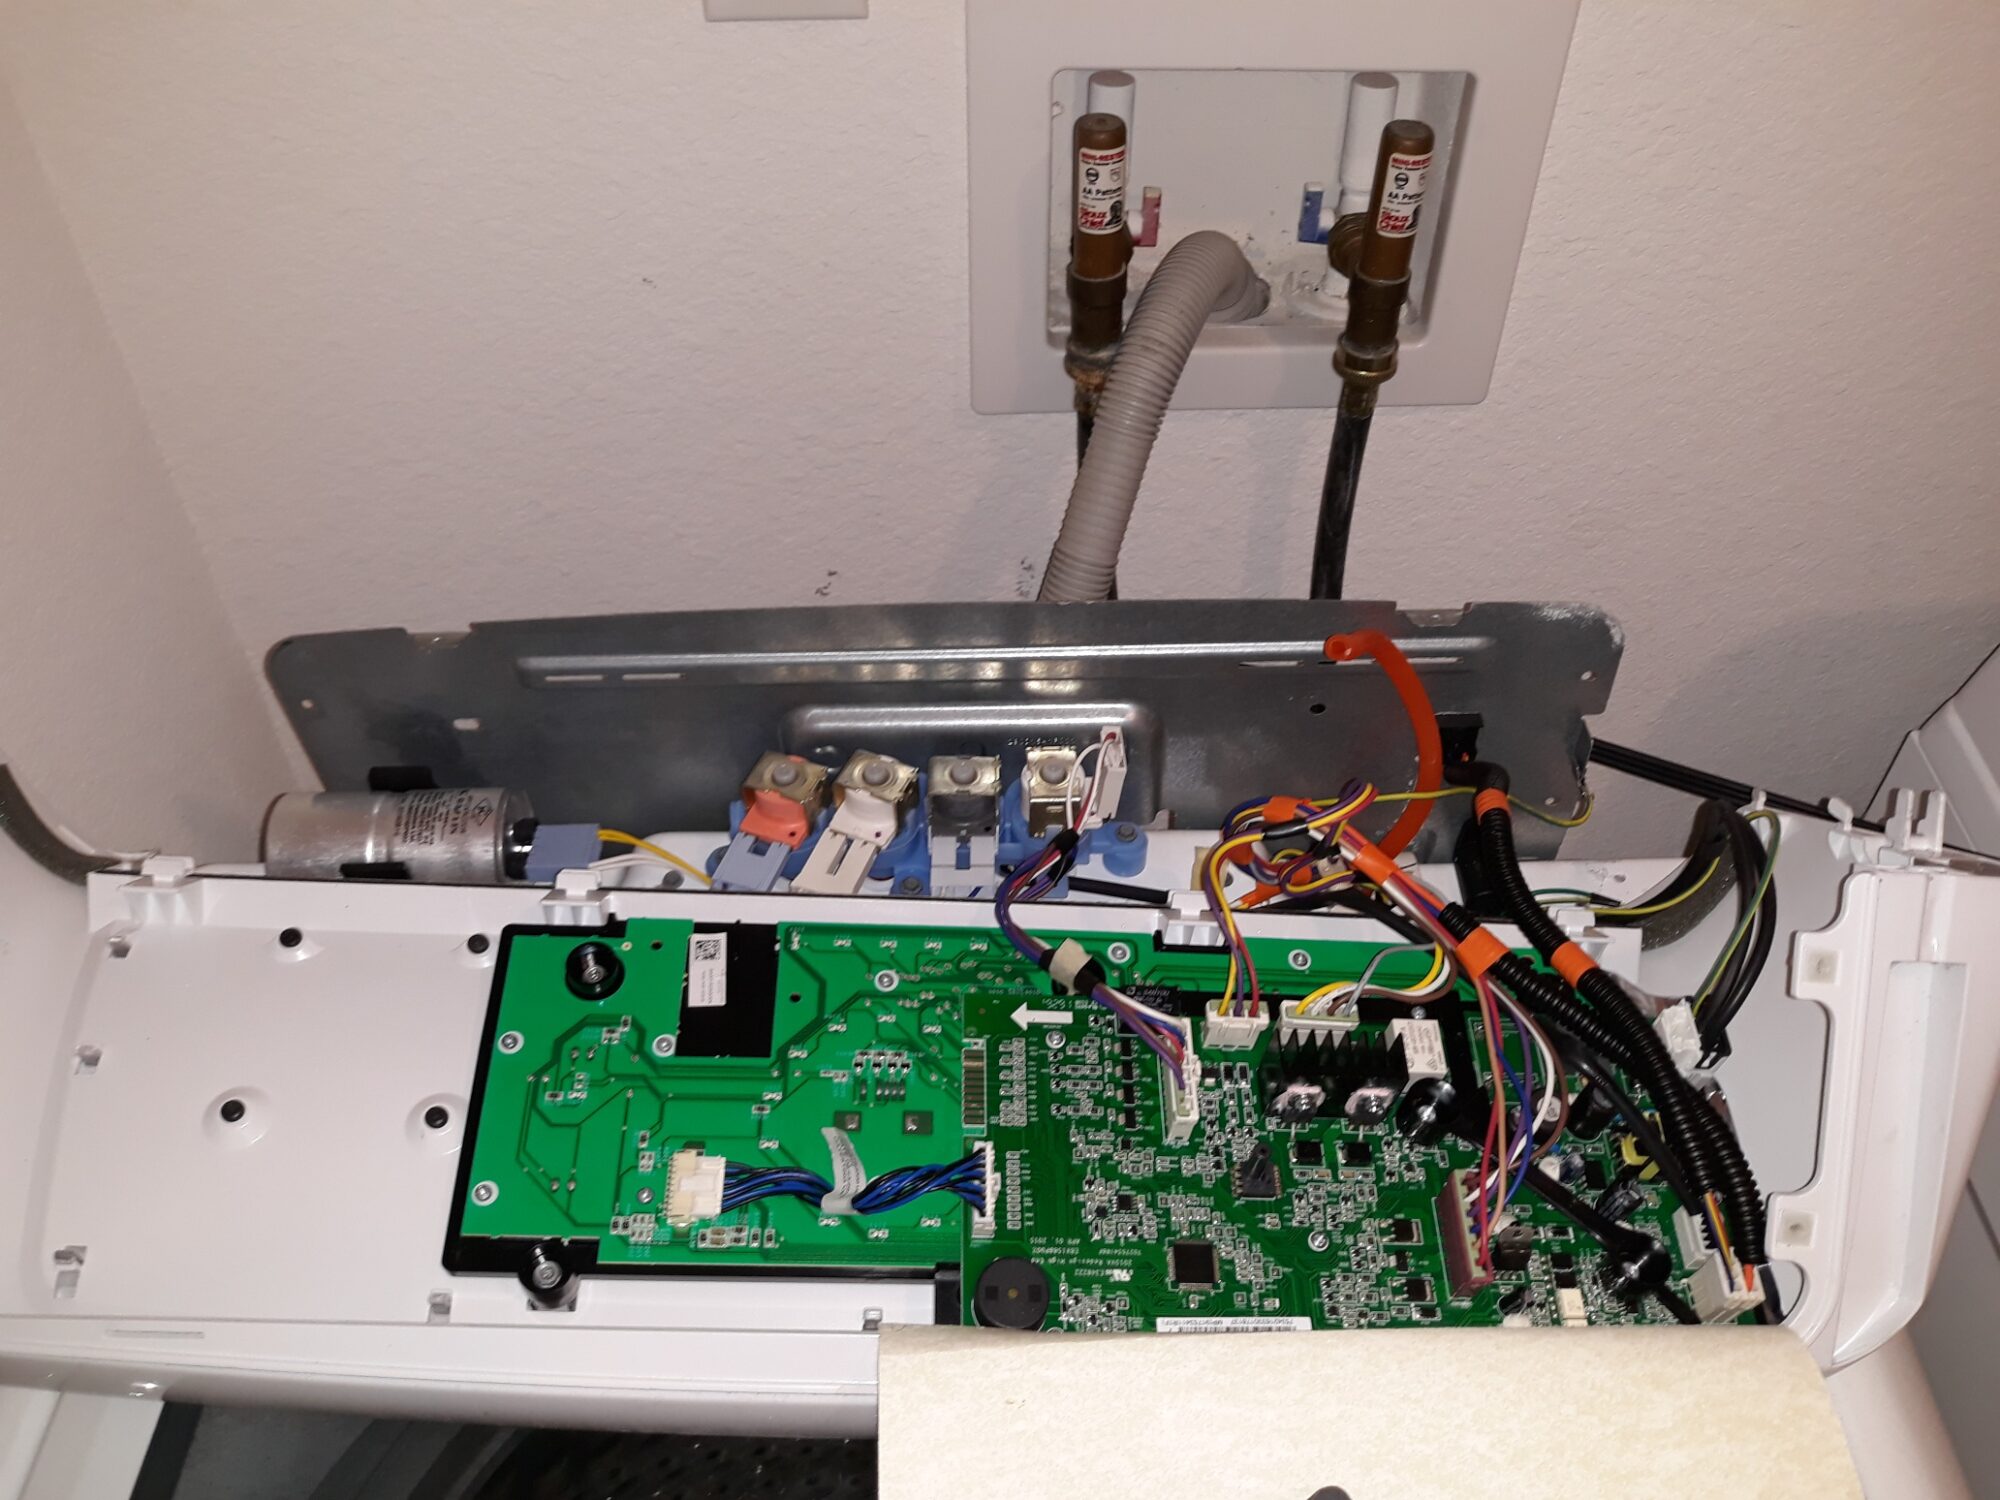 appliance repair washer repair repair require replacement of the failed drain pump motor assembly and the main control board that is shorted s main ave groveland fl 34736